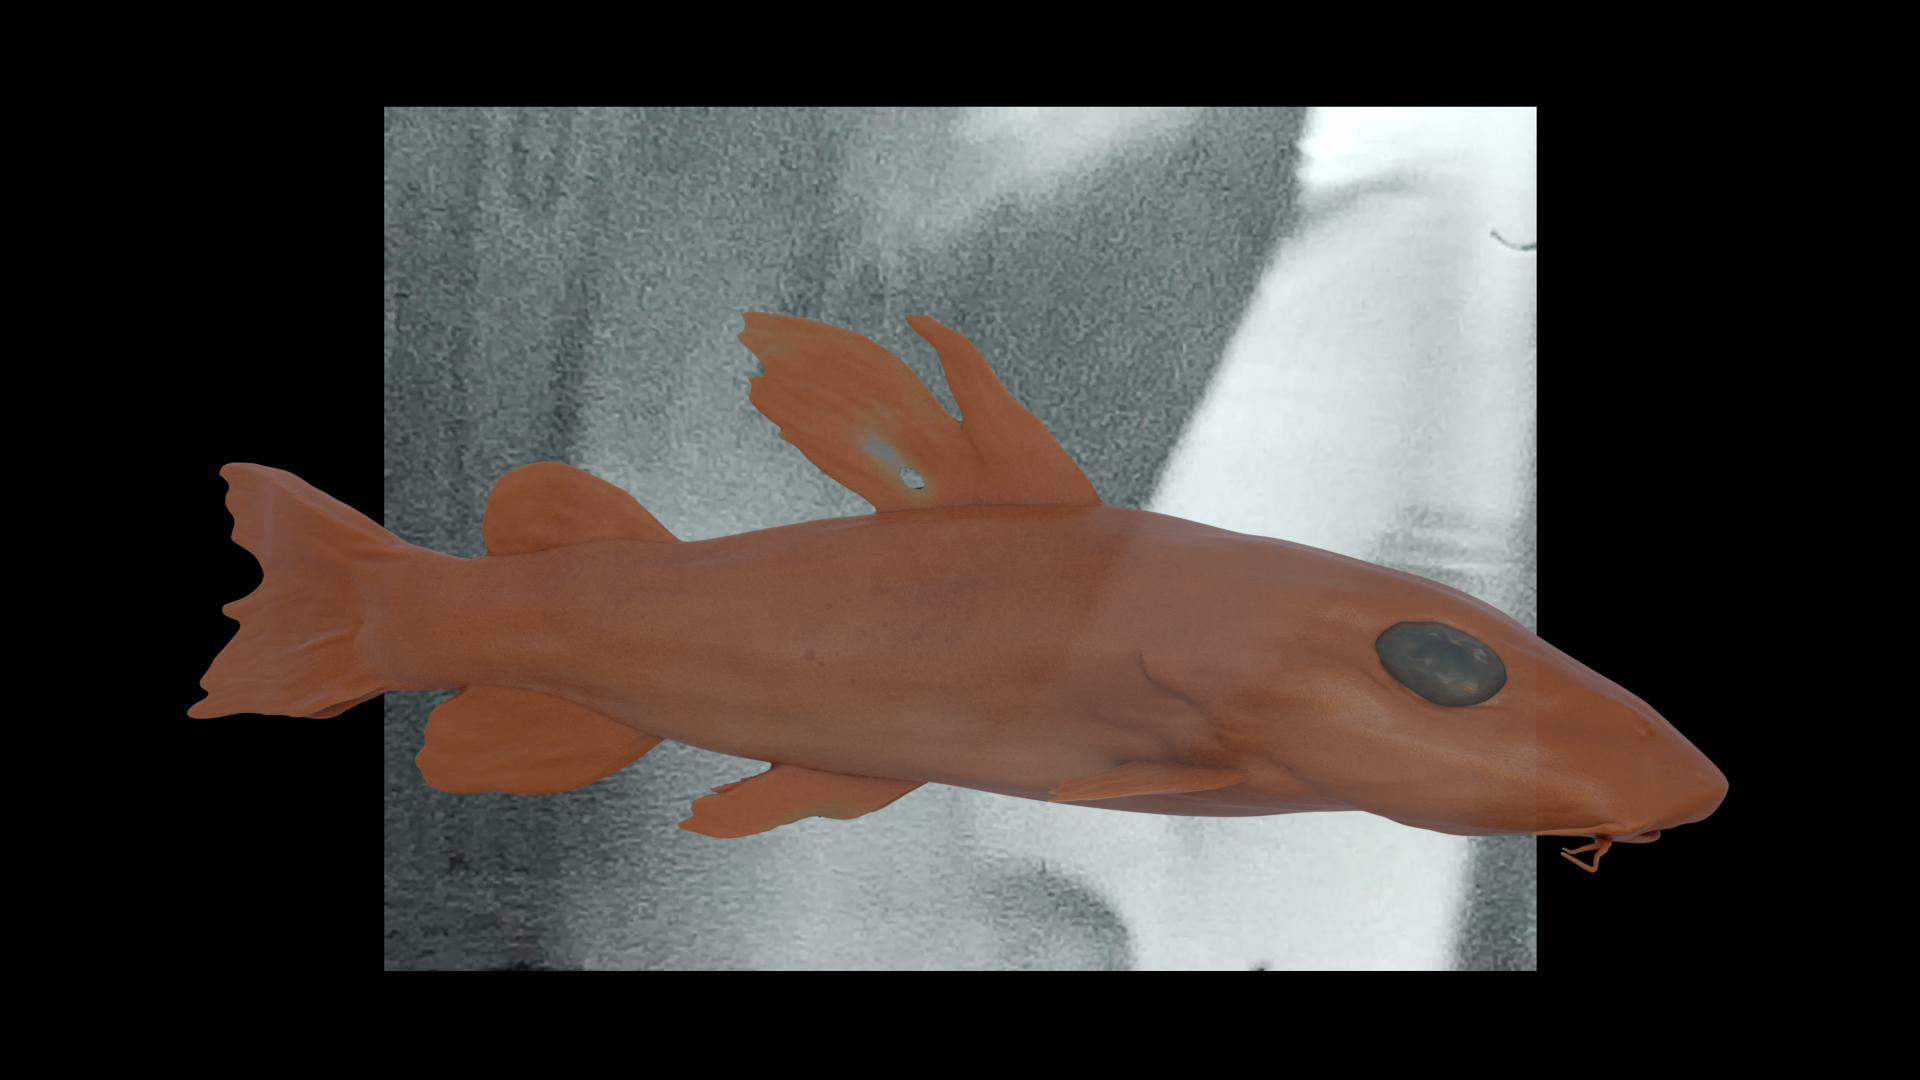 An image of a CGI fish swimming in front of a grainy found image.